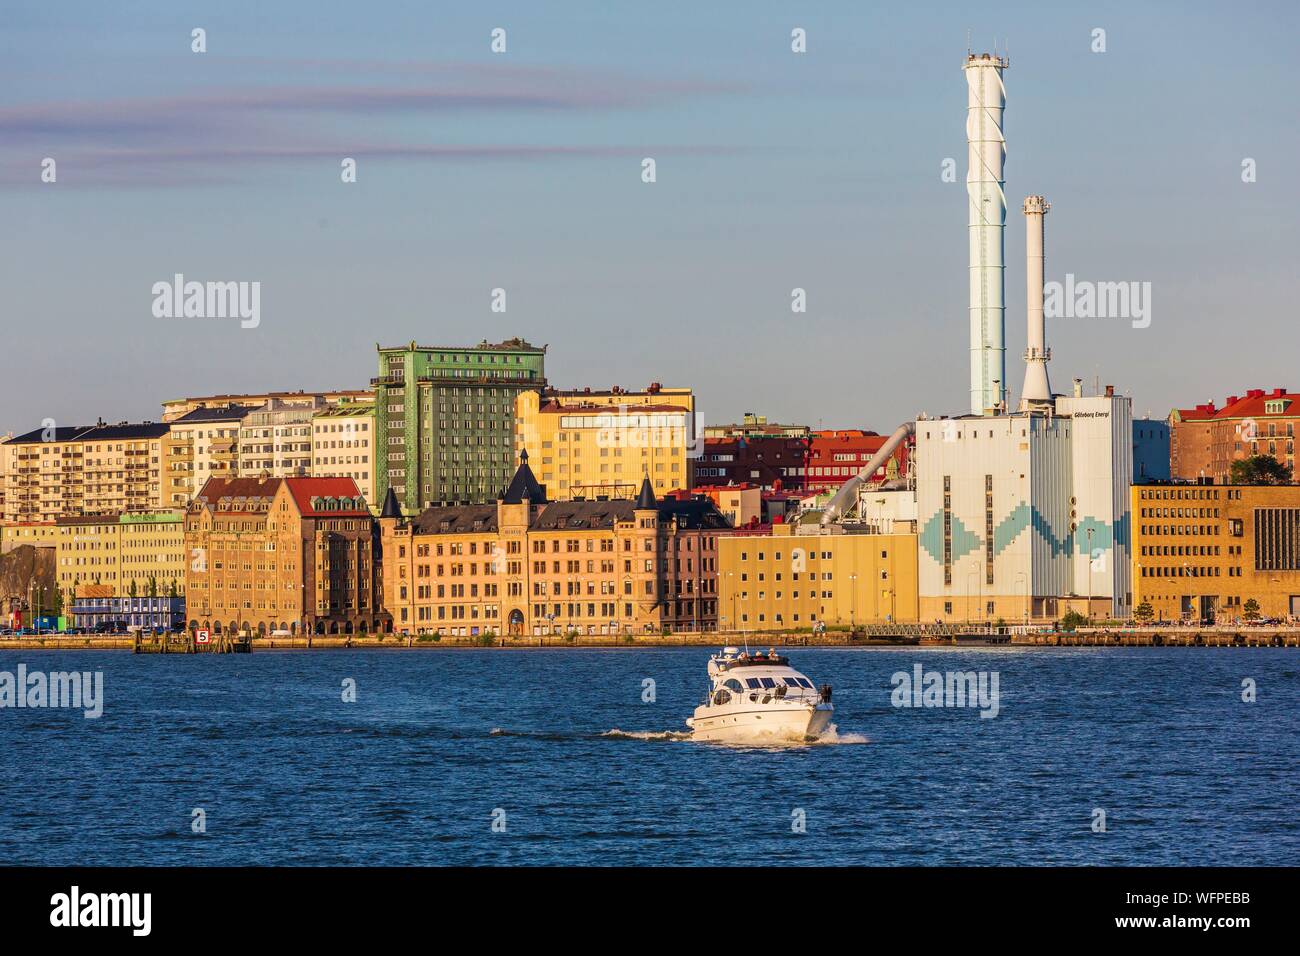 Sweden, Vastra Gotaland, Goteborg (Gothenburg), view of the thermal power plant of the city and the Affarshuset Merkur who is the oldest remaining house on Skeppsbron Stock Photo